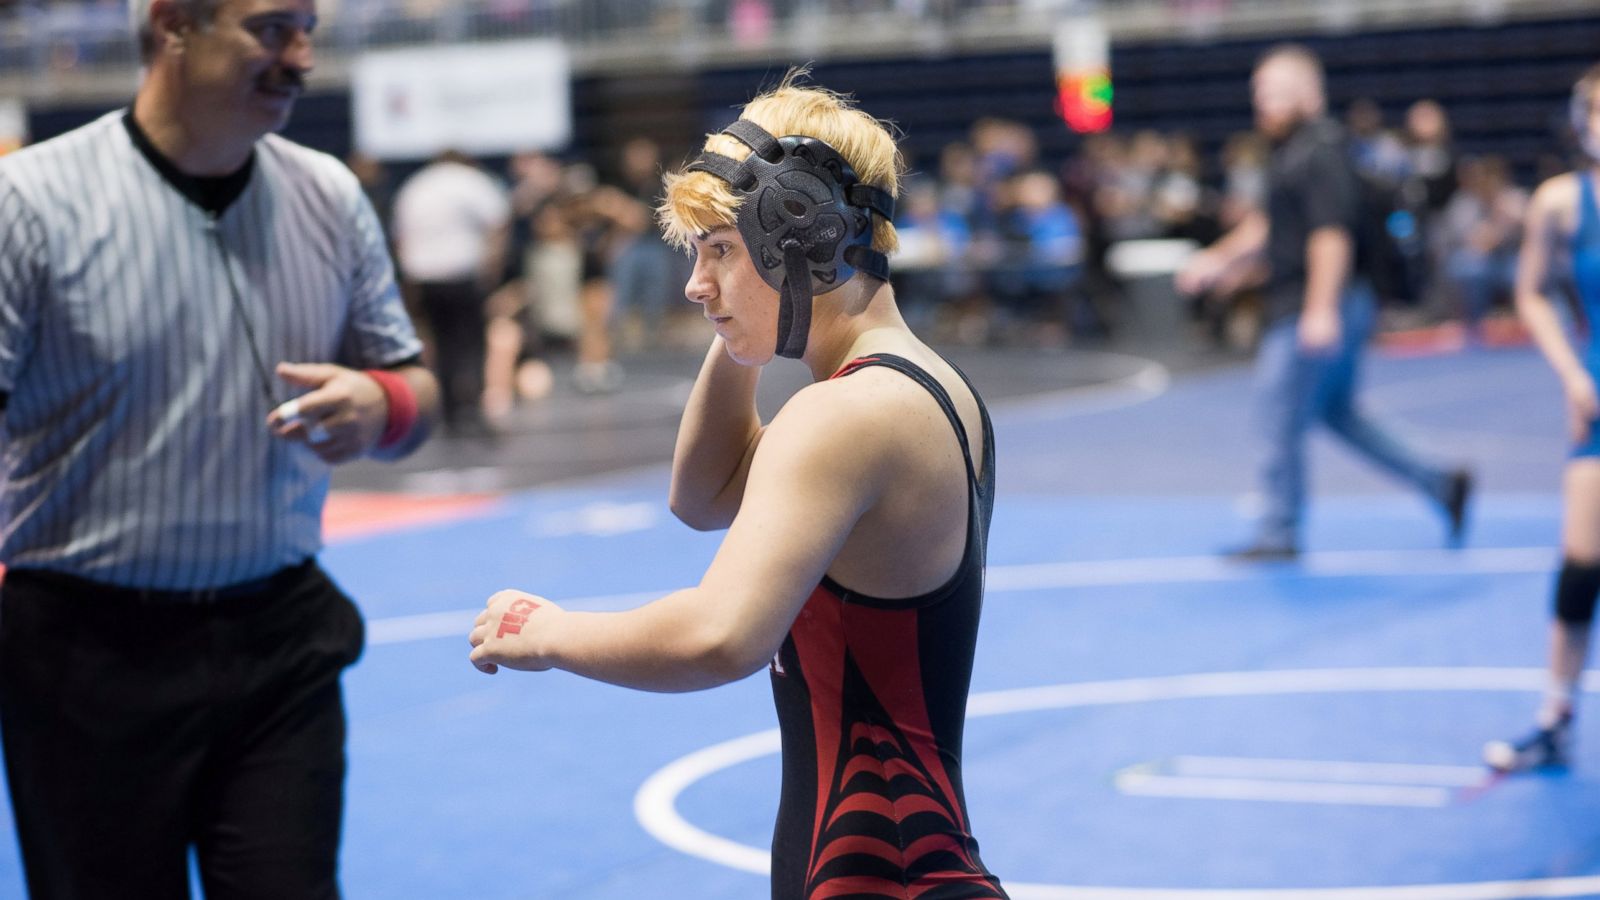 Transgender teen wrestler whos used to winning on mat now has a bigger, though partial, victory picture